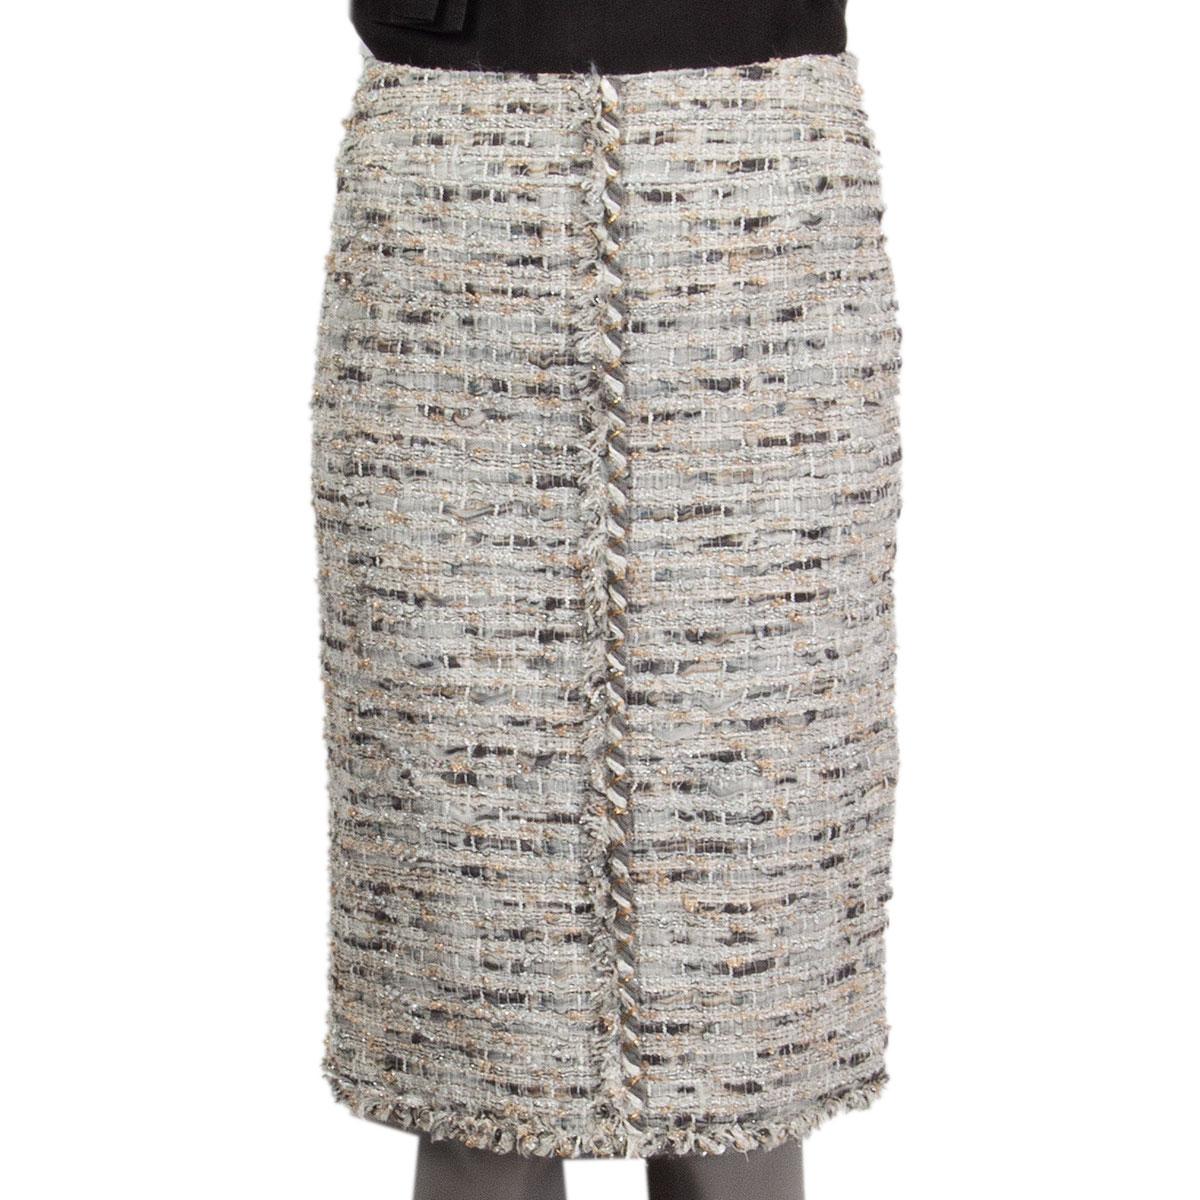 100% authentic Chanel boucle pencil skirt in light grey, grey, gold and silver silk (60%), nylon (10%), polyester (10%), rayon (10%) and cotton (10%) with embroidery on the mid-front and back and at the hem-line. Closes with one hook and a concealed